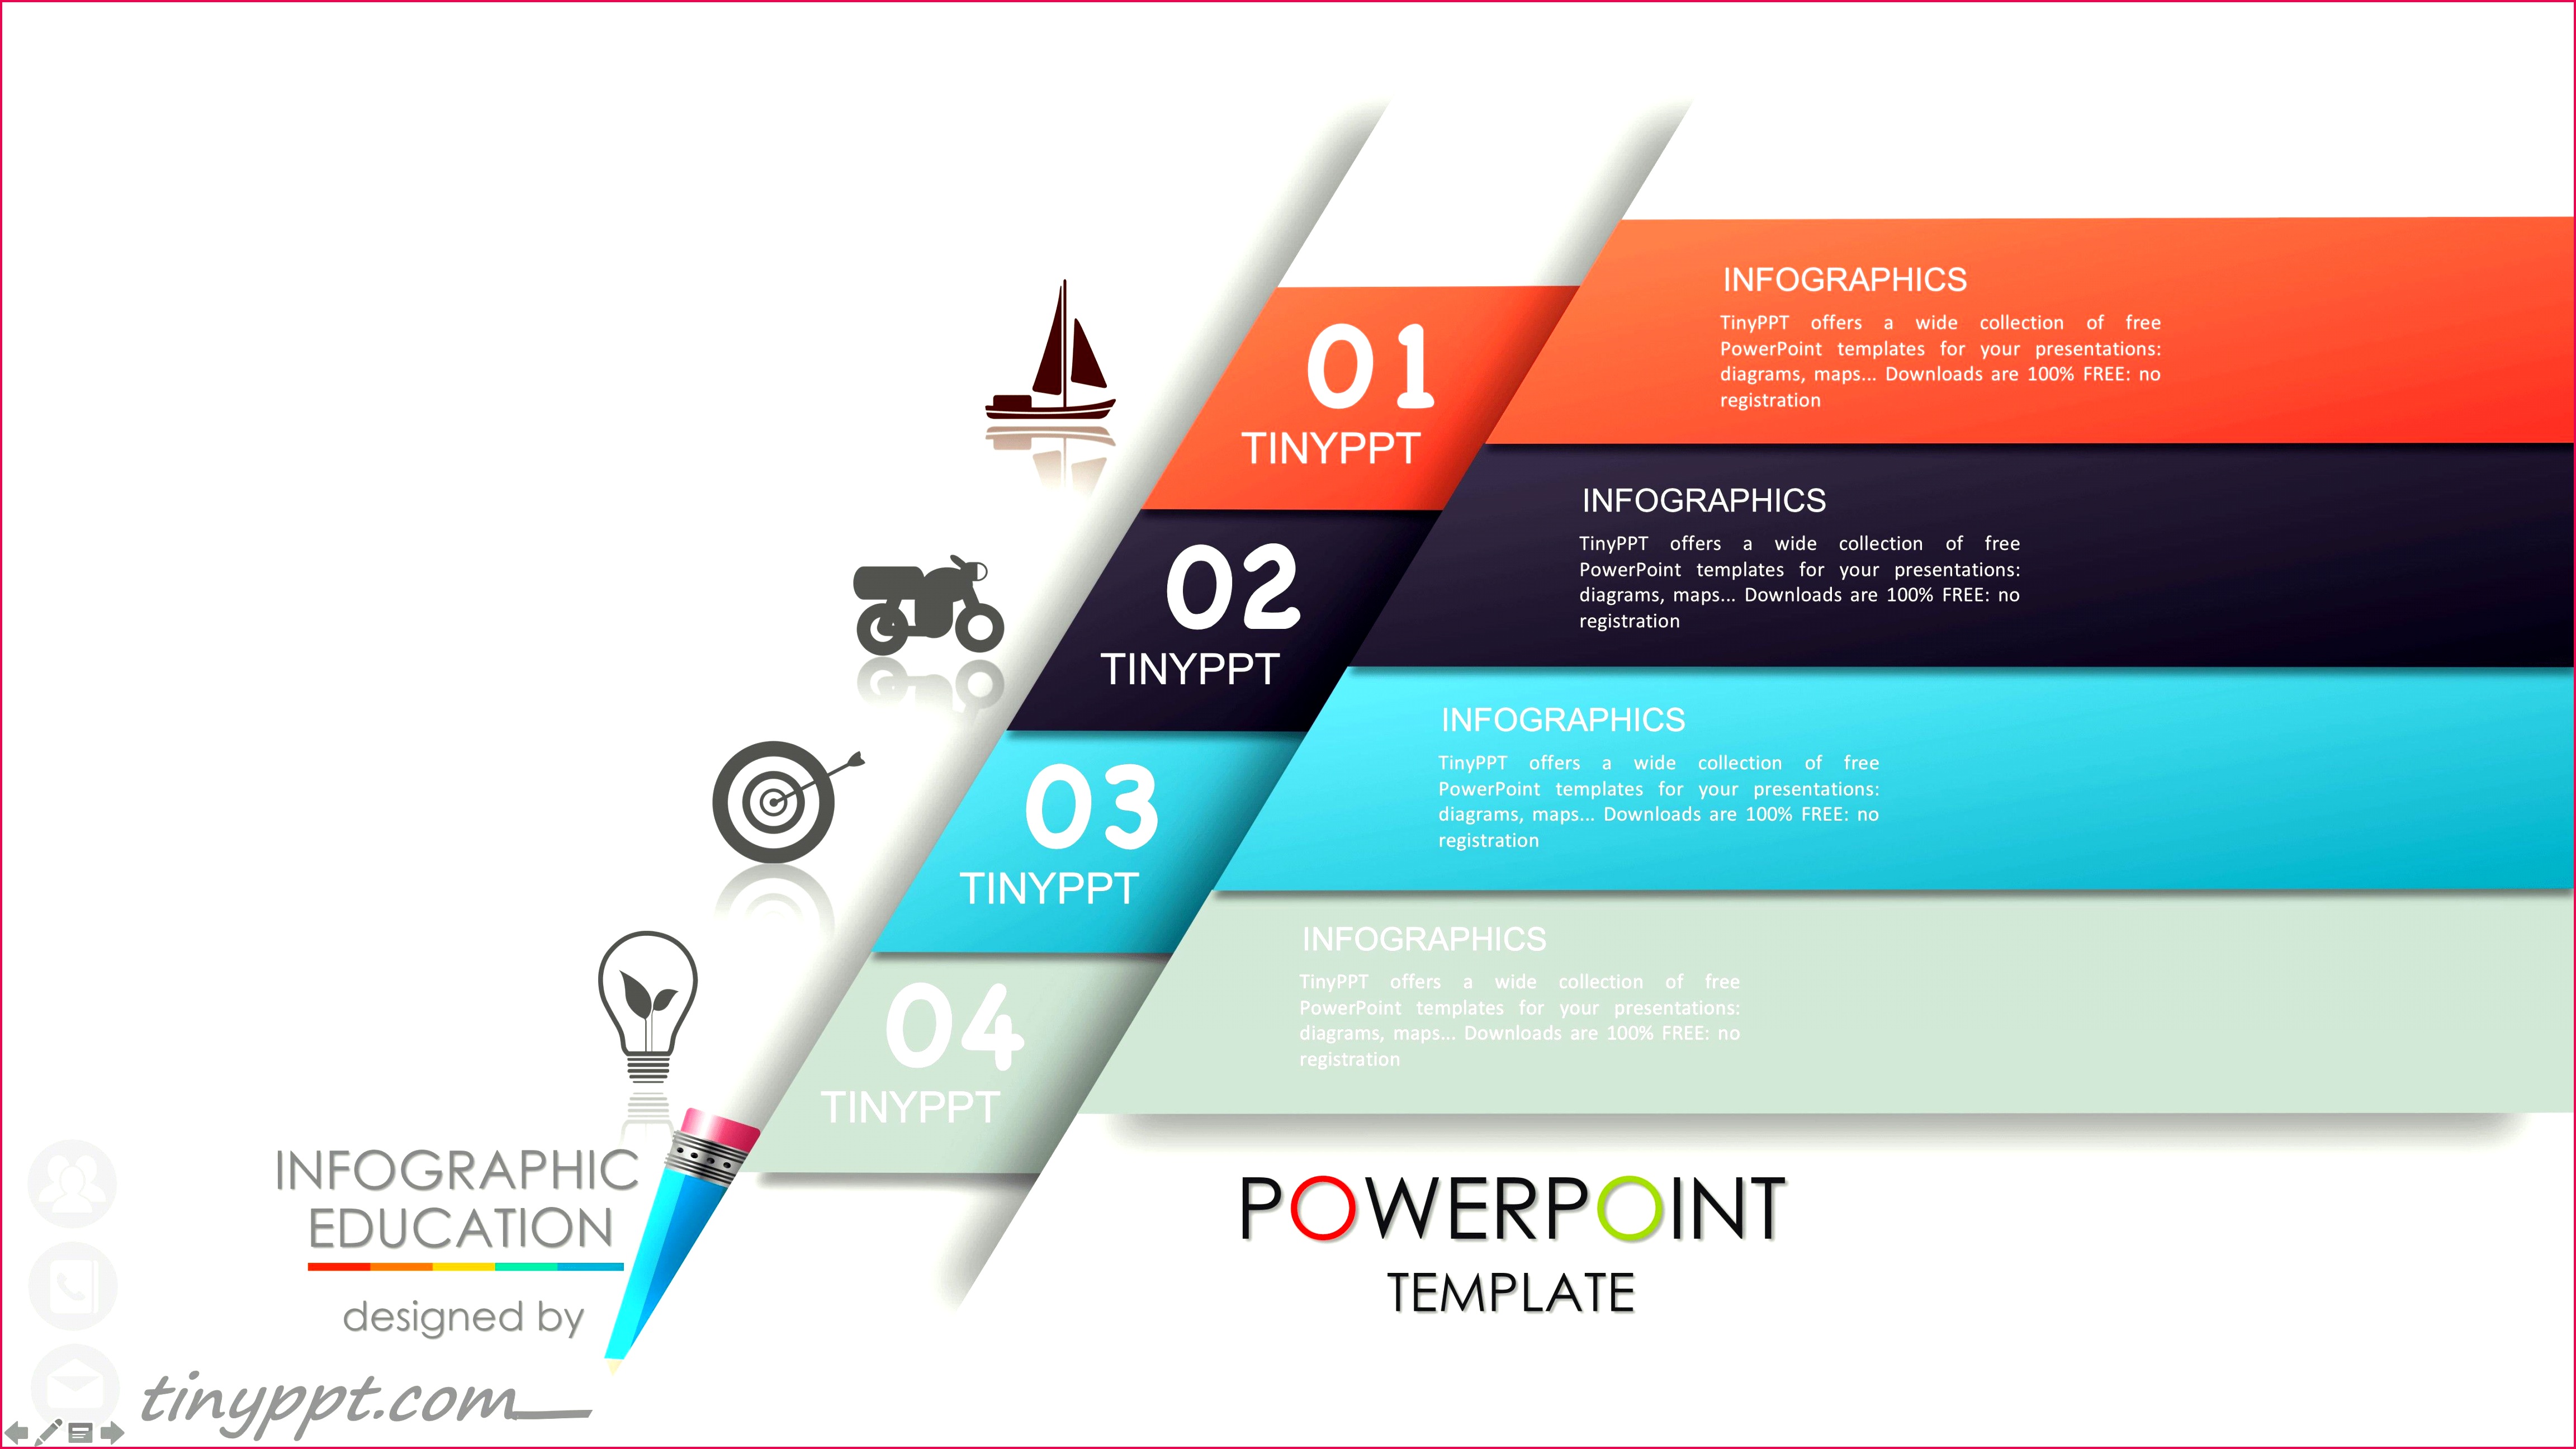 strategic plan infographic ppt template business fresh powerpoint background design powerpoint templates for 2007 ppt 0d latest templates free premium premium powerpoint templates 16b